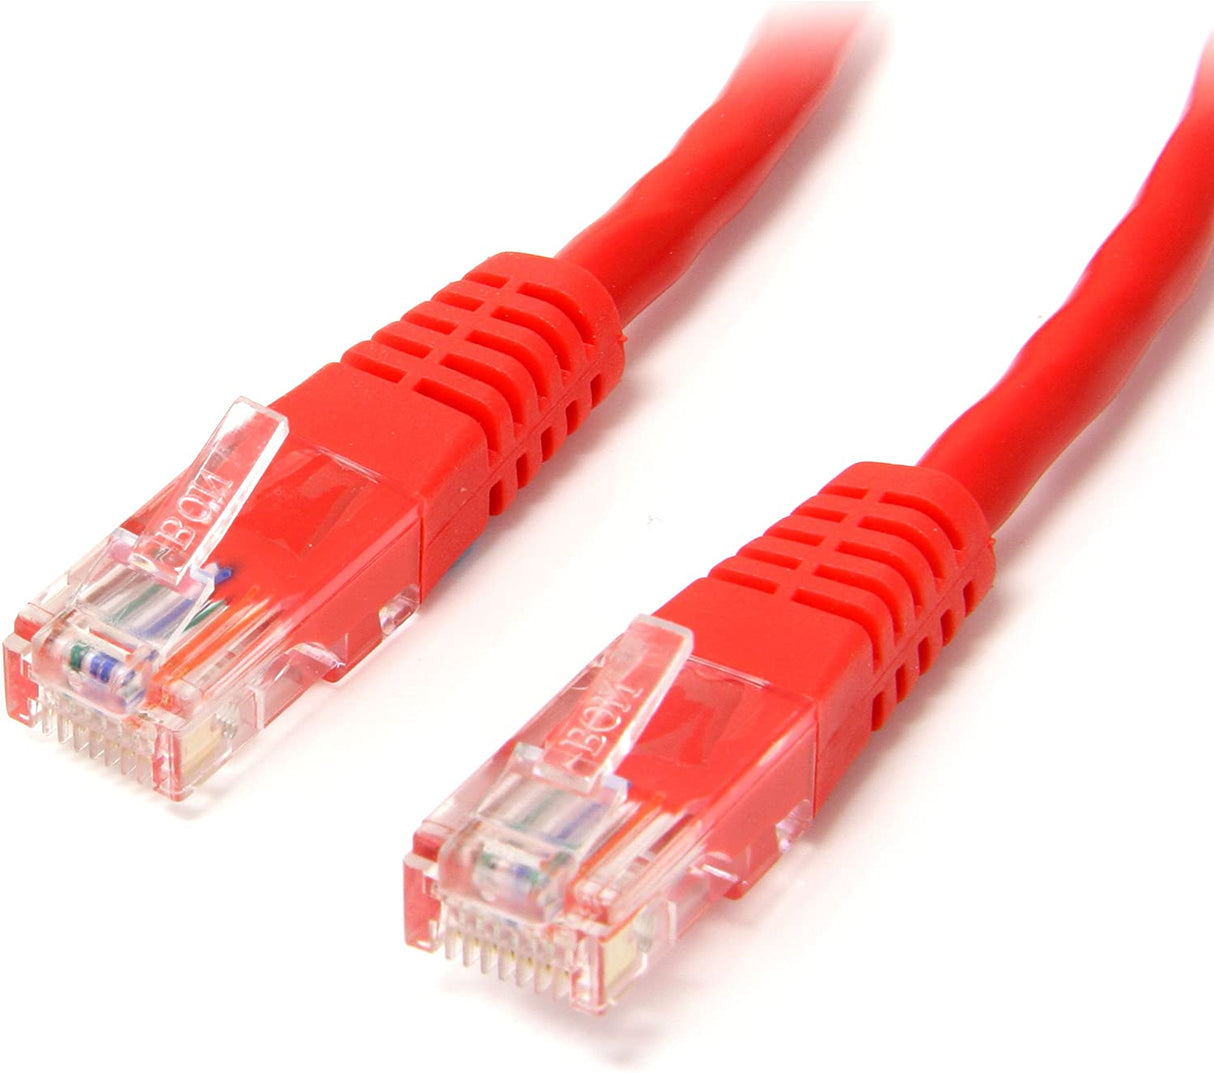 StarTech.com Cat5e Ethernet Cable - 15 ft - Red - Patch Cable - Molded Cat5e Cable - Network Cable - Ethernet Cord - Cat 5e Cable - 15ft (M45PATCH15RD) 15 ft / 4.5m Red